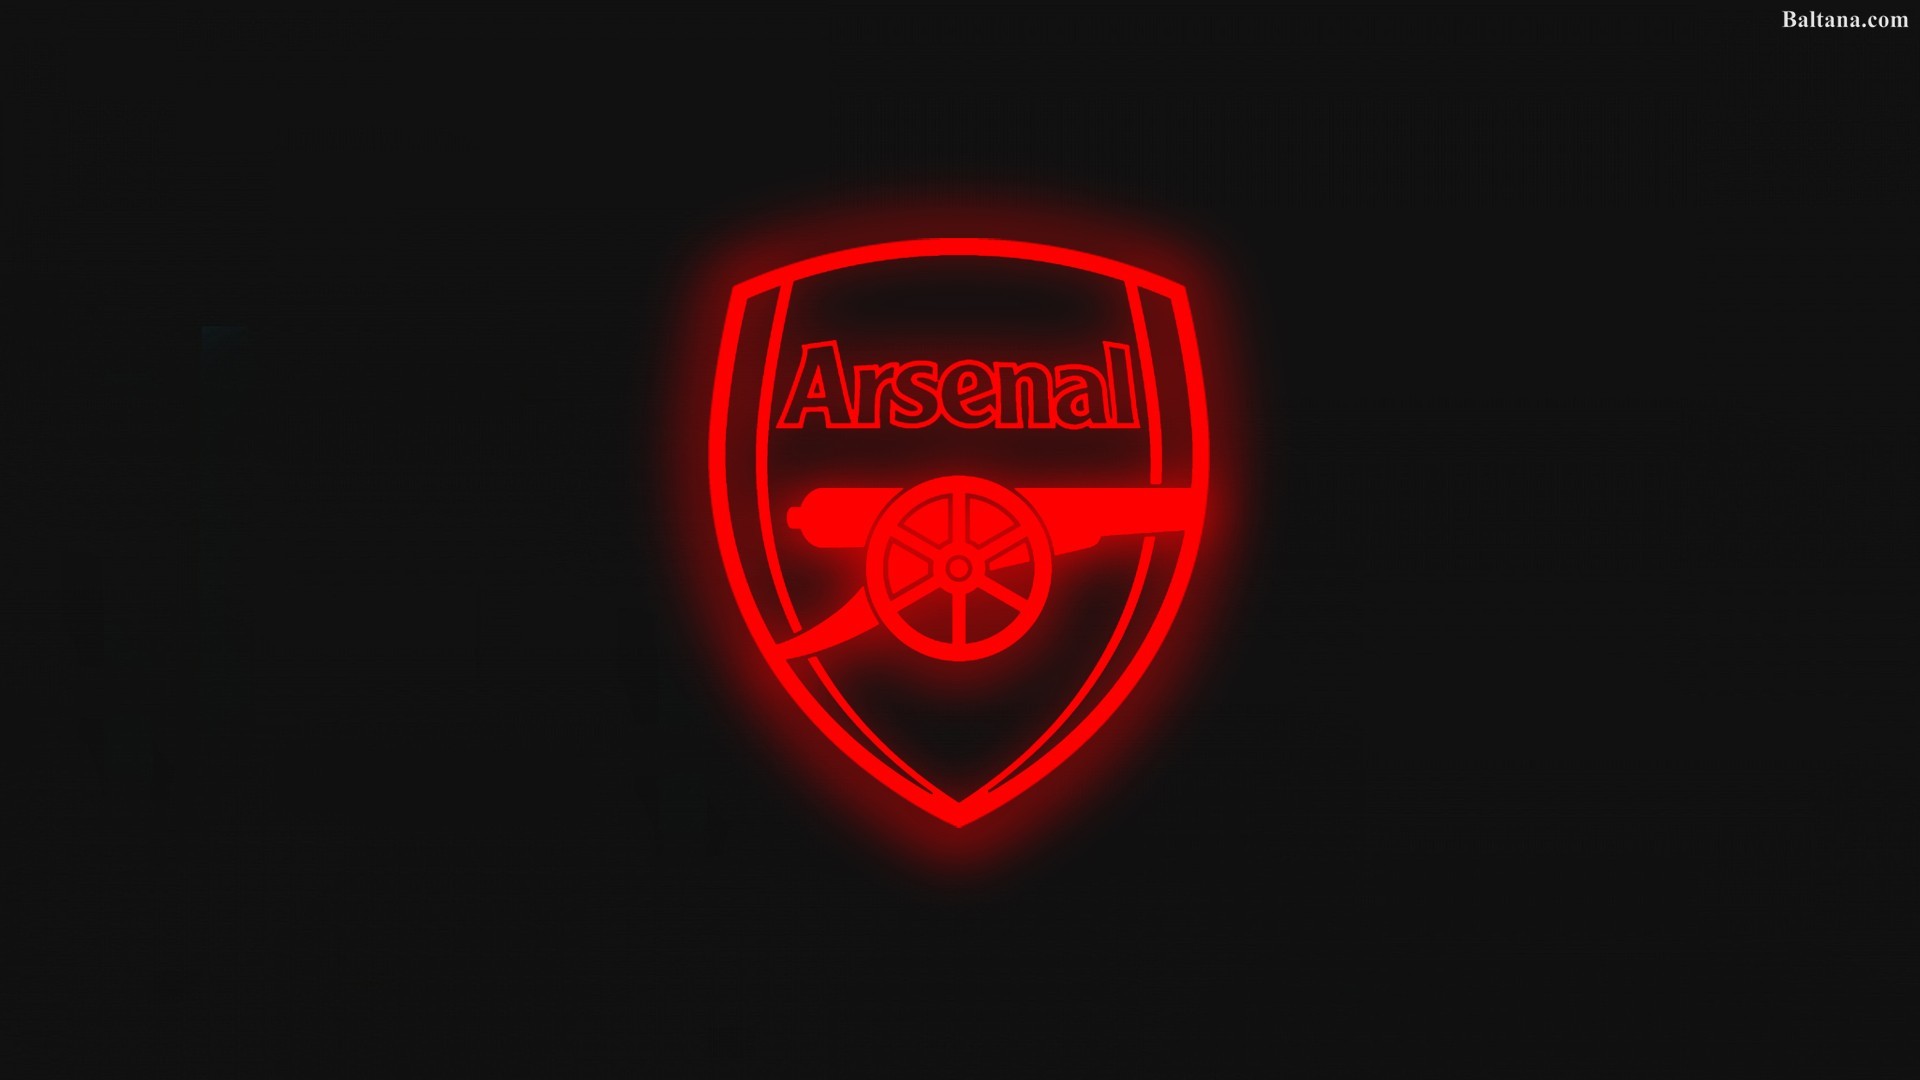 1920x1080 Arsenal F.C Widescreen Wallpapers 33883